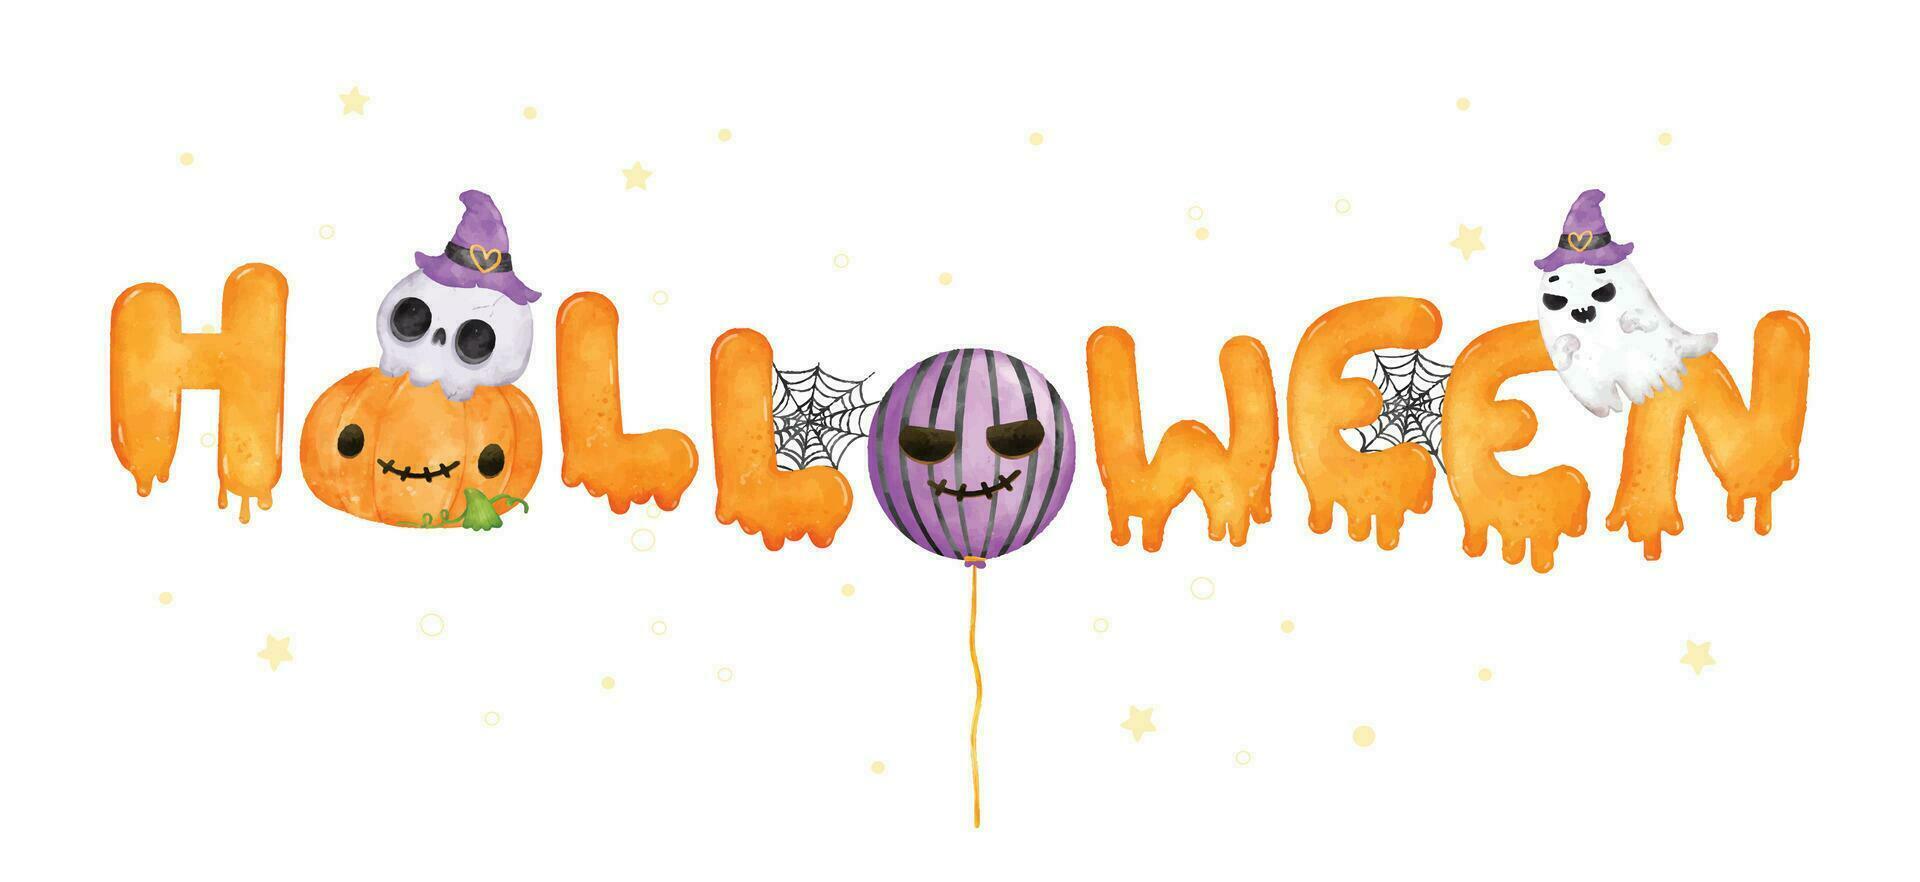 Celebrate the spooky holiday with this cute and colorful Halloween lettering banner. The handdrawn watercolor illustration features a playful combination of ghost, pumpkin, and skull vector